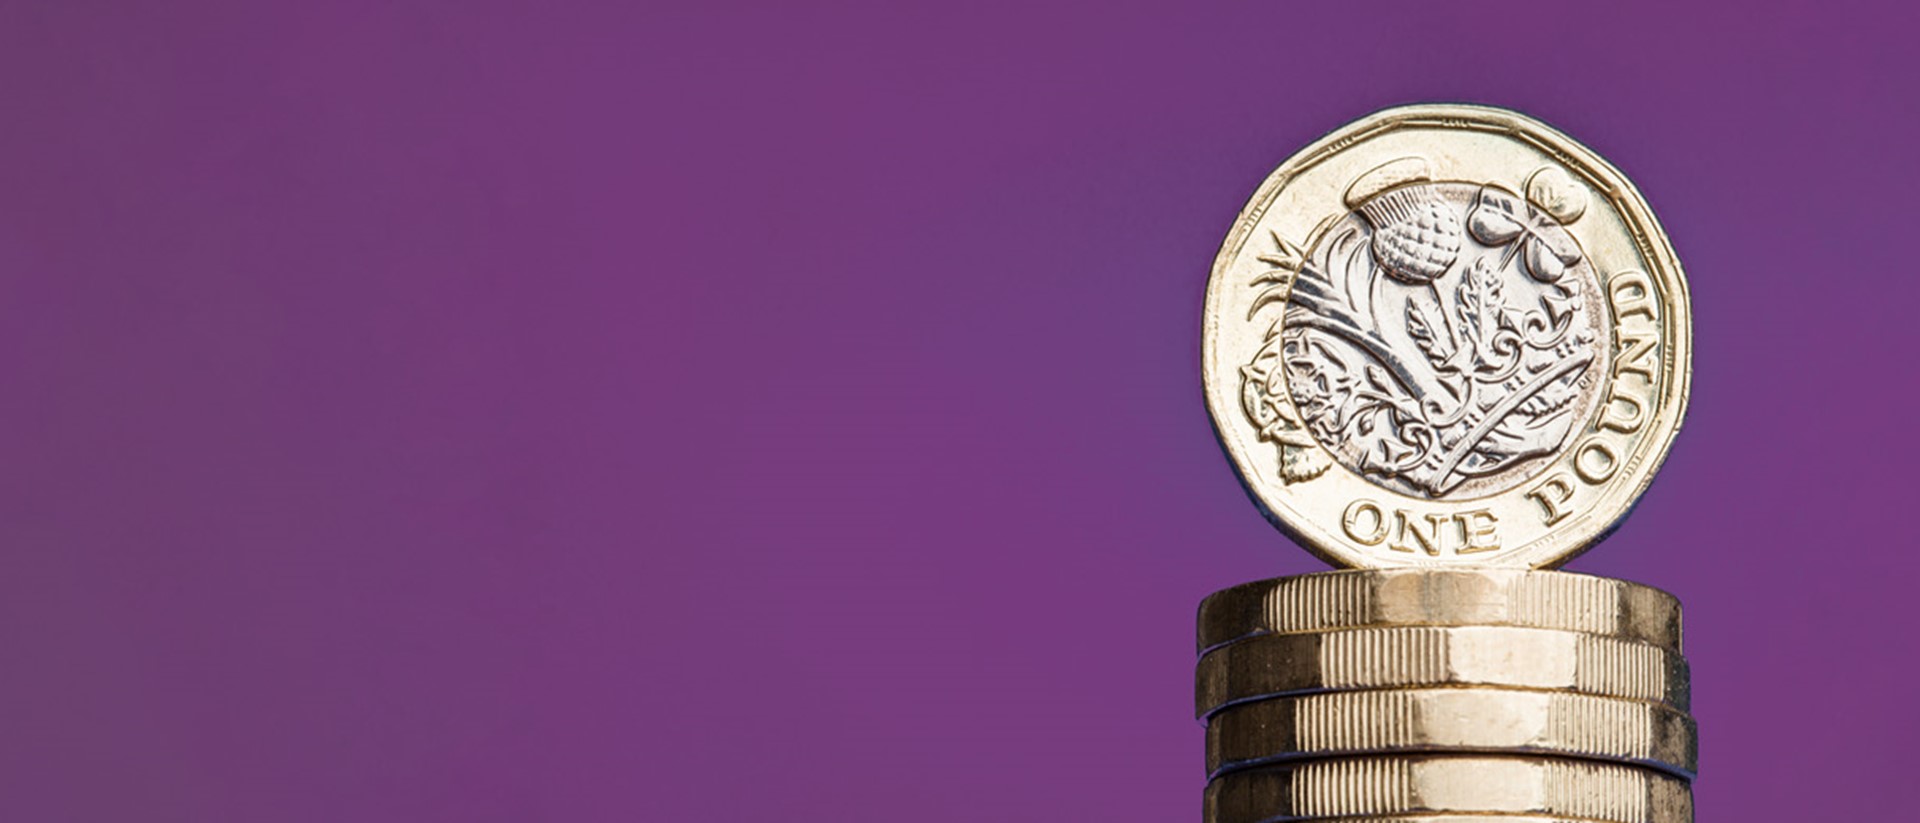 A pound coin stacked on top of other pound coins against a purple background